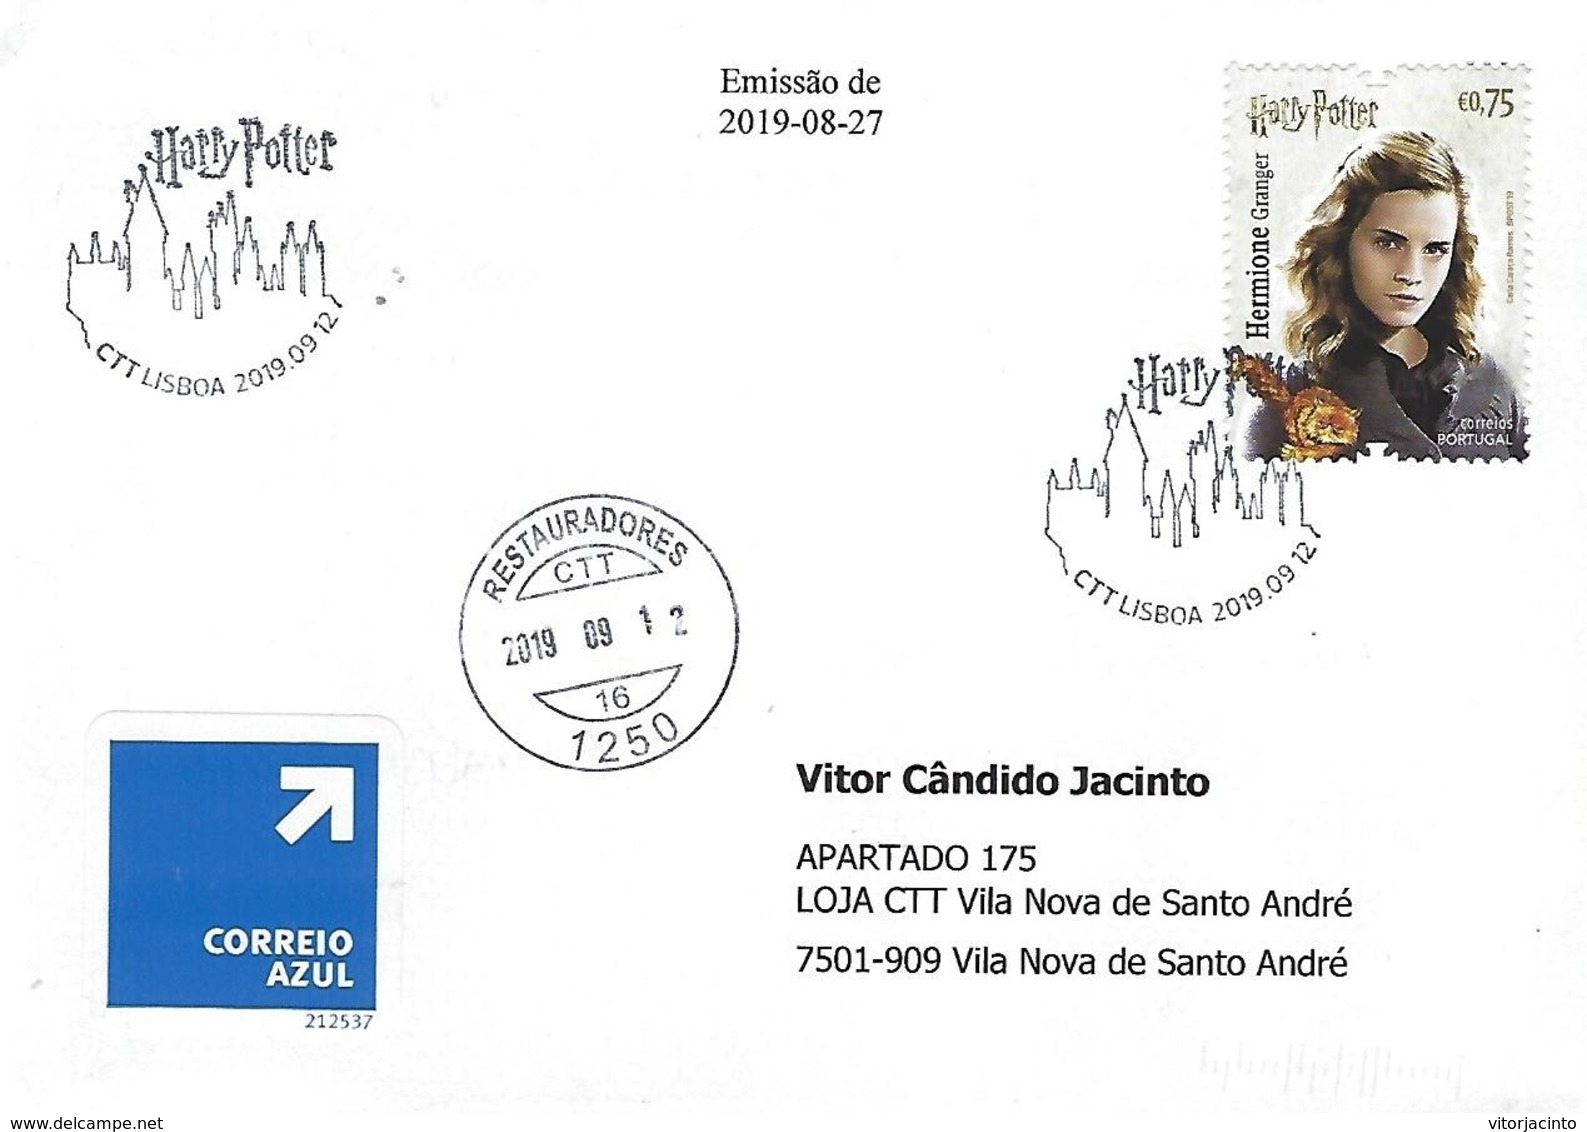 PORTUGAL - Harry Potter 2019 - Commemorative Postmark Above HPotter Stamps ~ Cover Real Circulated ~ - Marcofilia